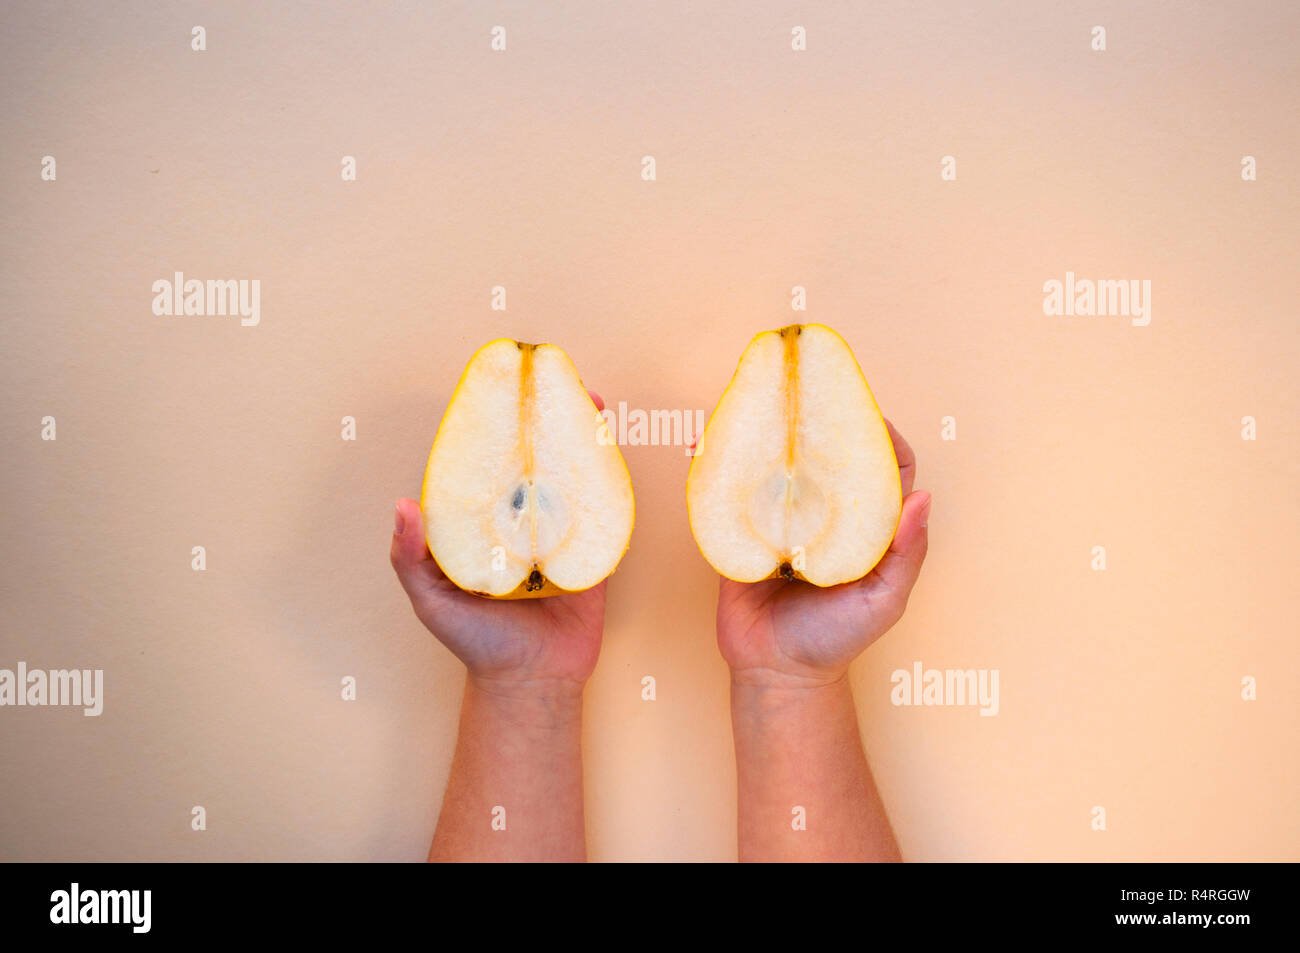 Two yellow sweet and ripe pears in hchild's hands on a beige background. Minimal food concept. Stock Photo